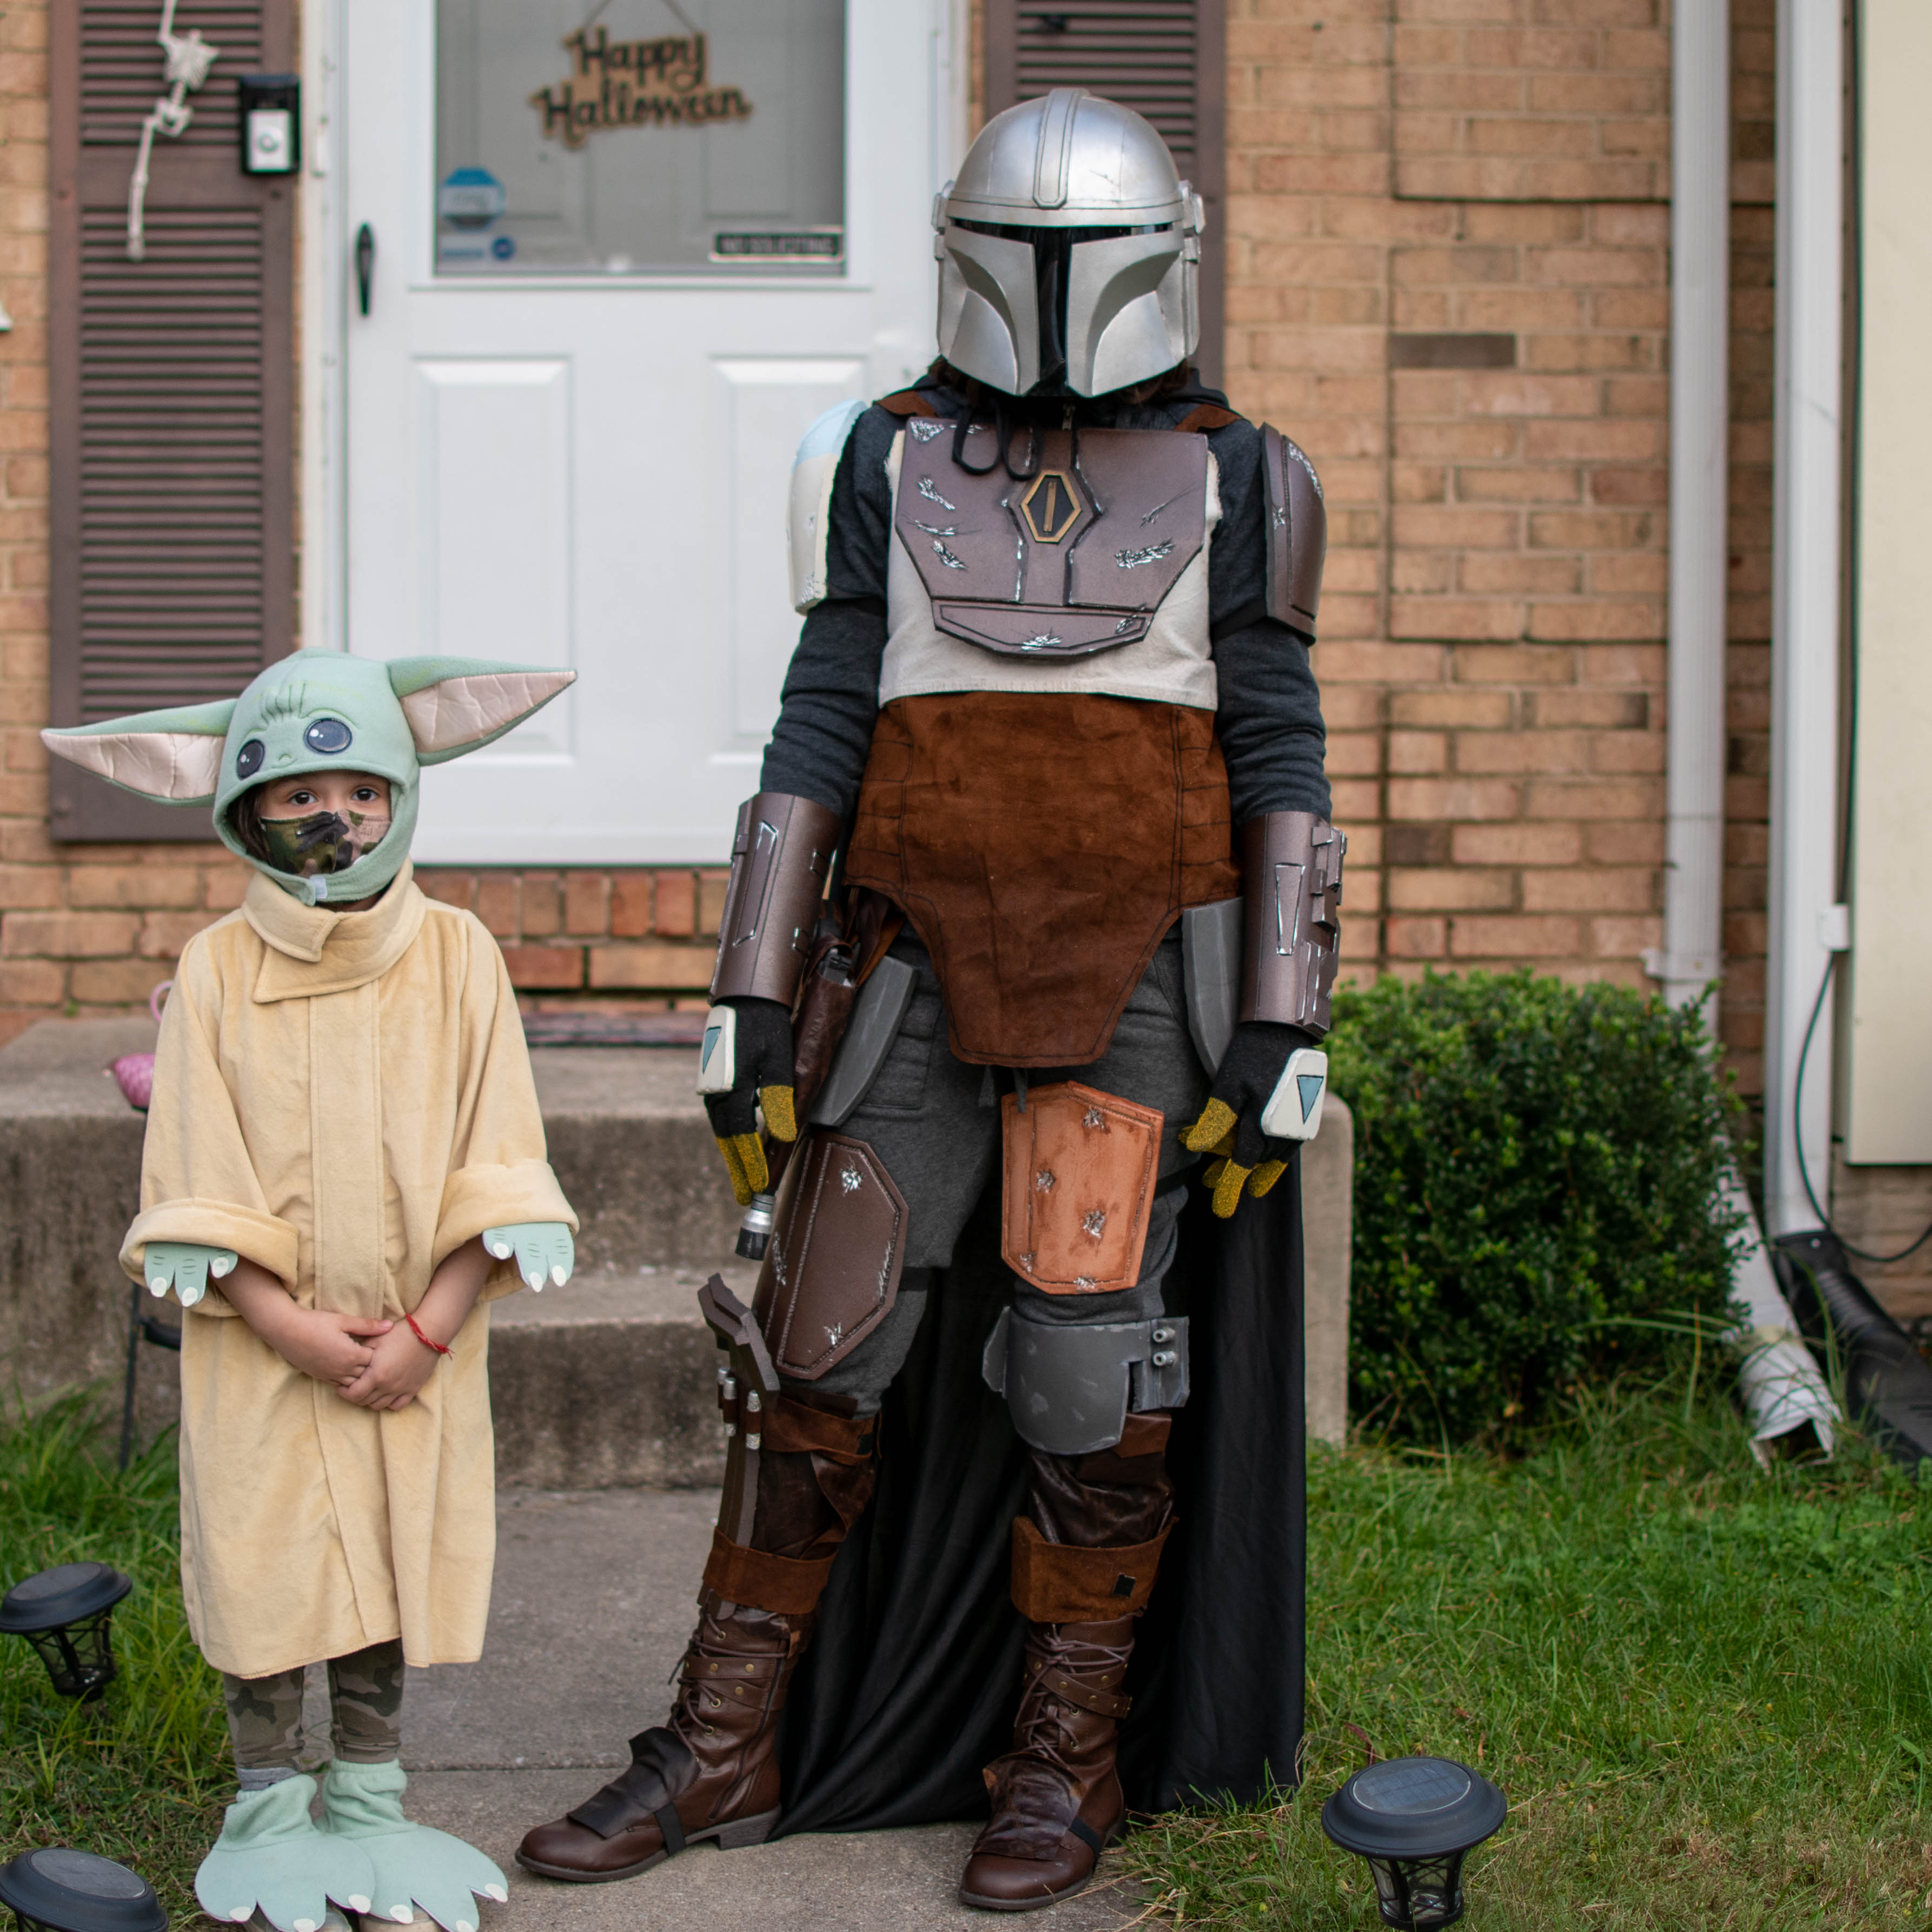 Aanya and Teagan dressed up for Halloween as The Mandalorian and Grogu